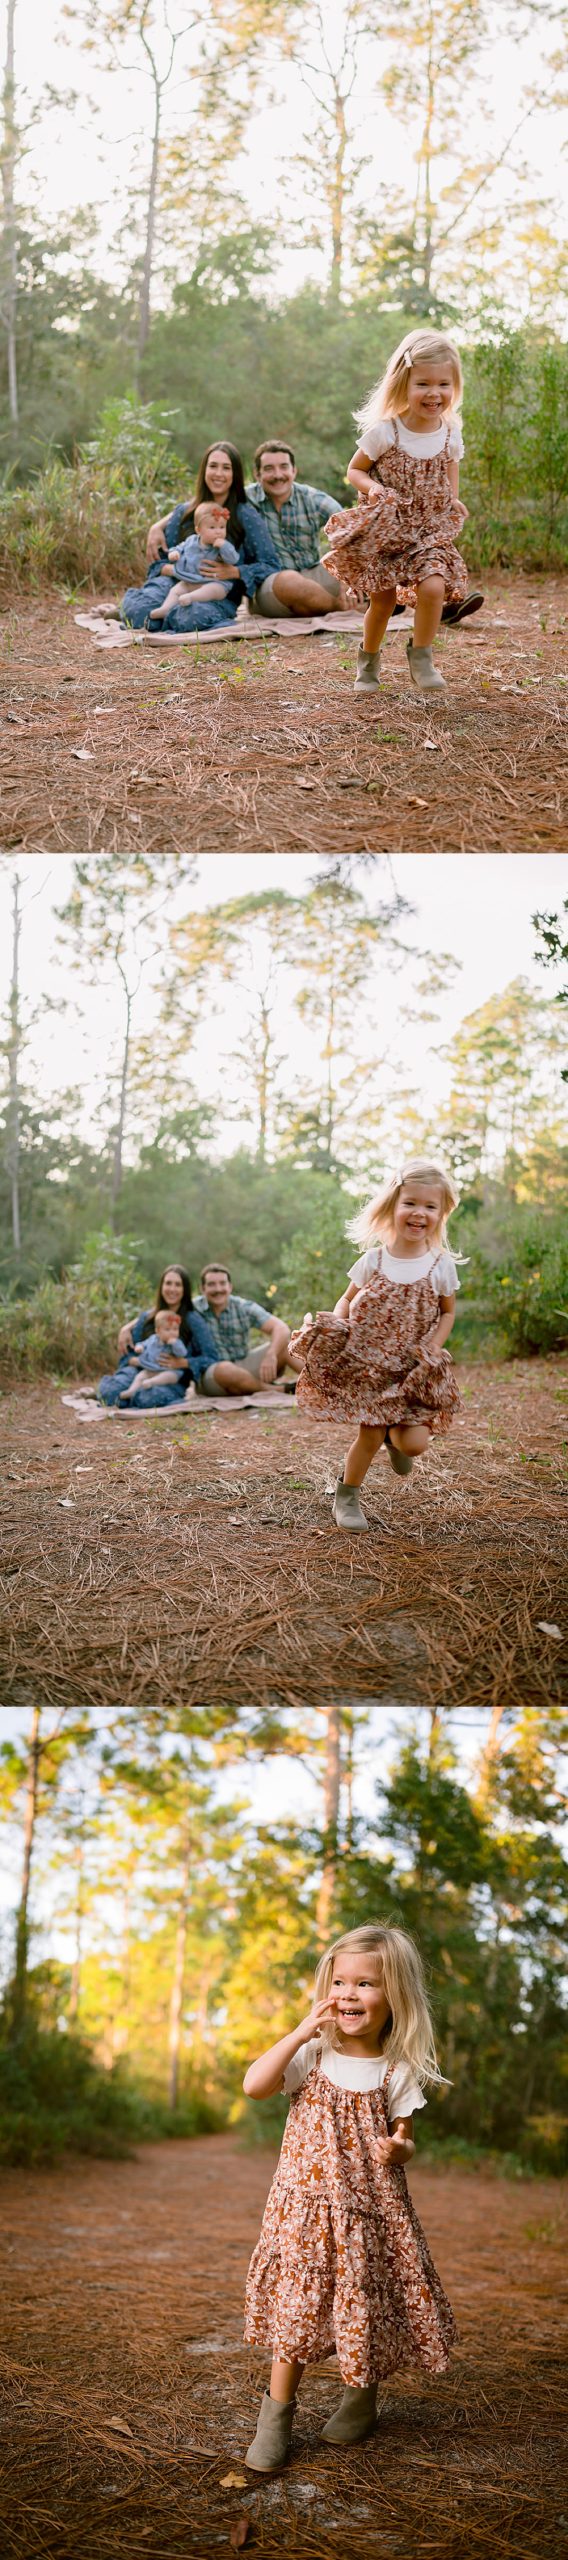 daughter running from parents sitting on blanket in the woods by florida photographer 